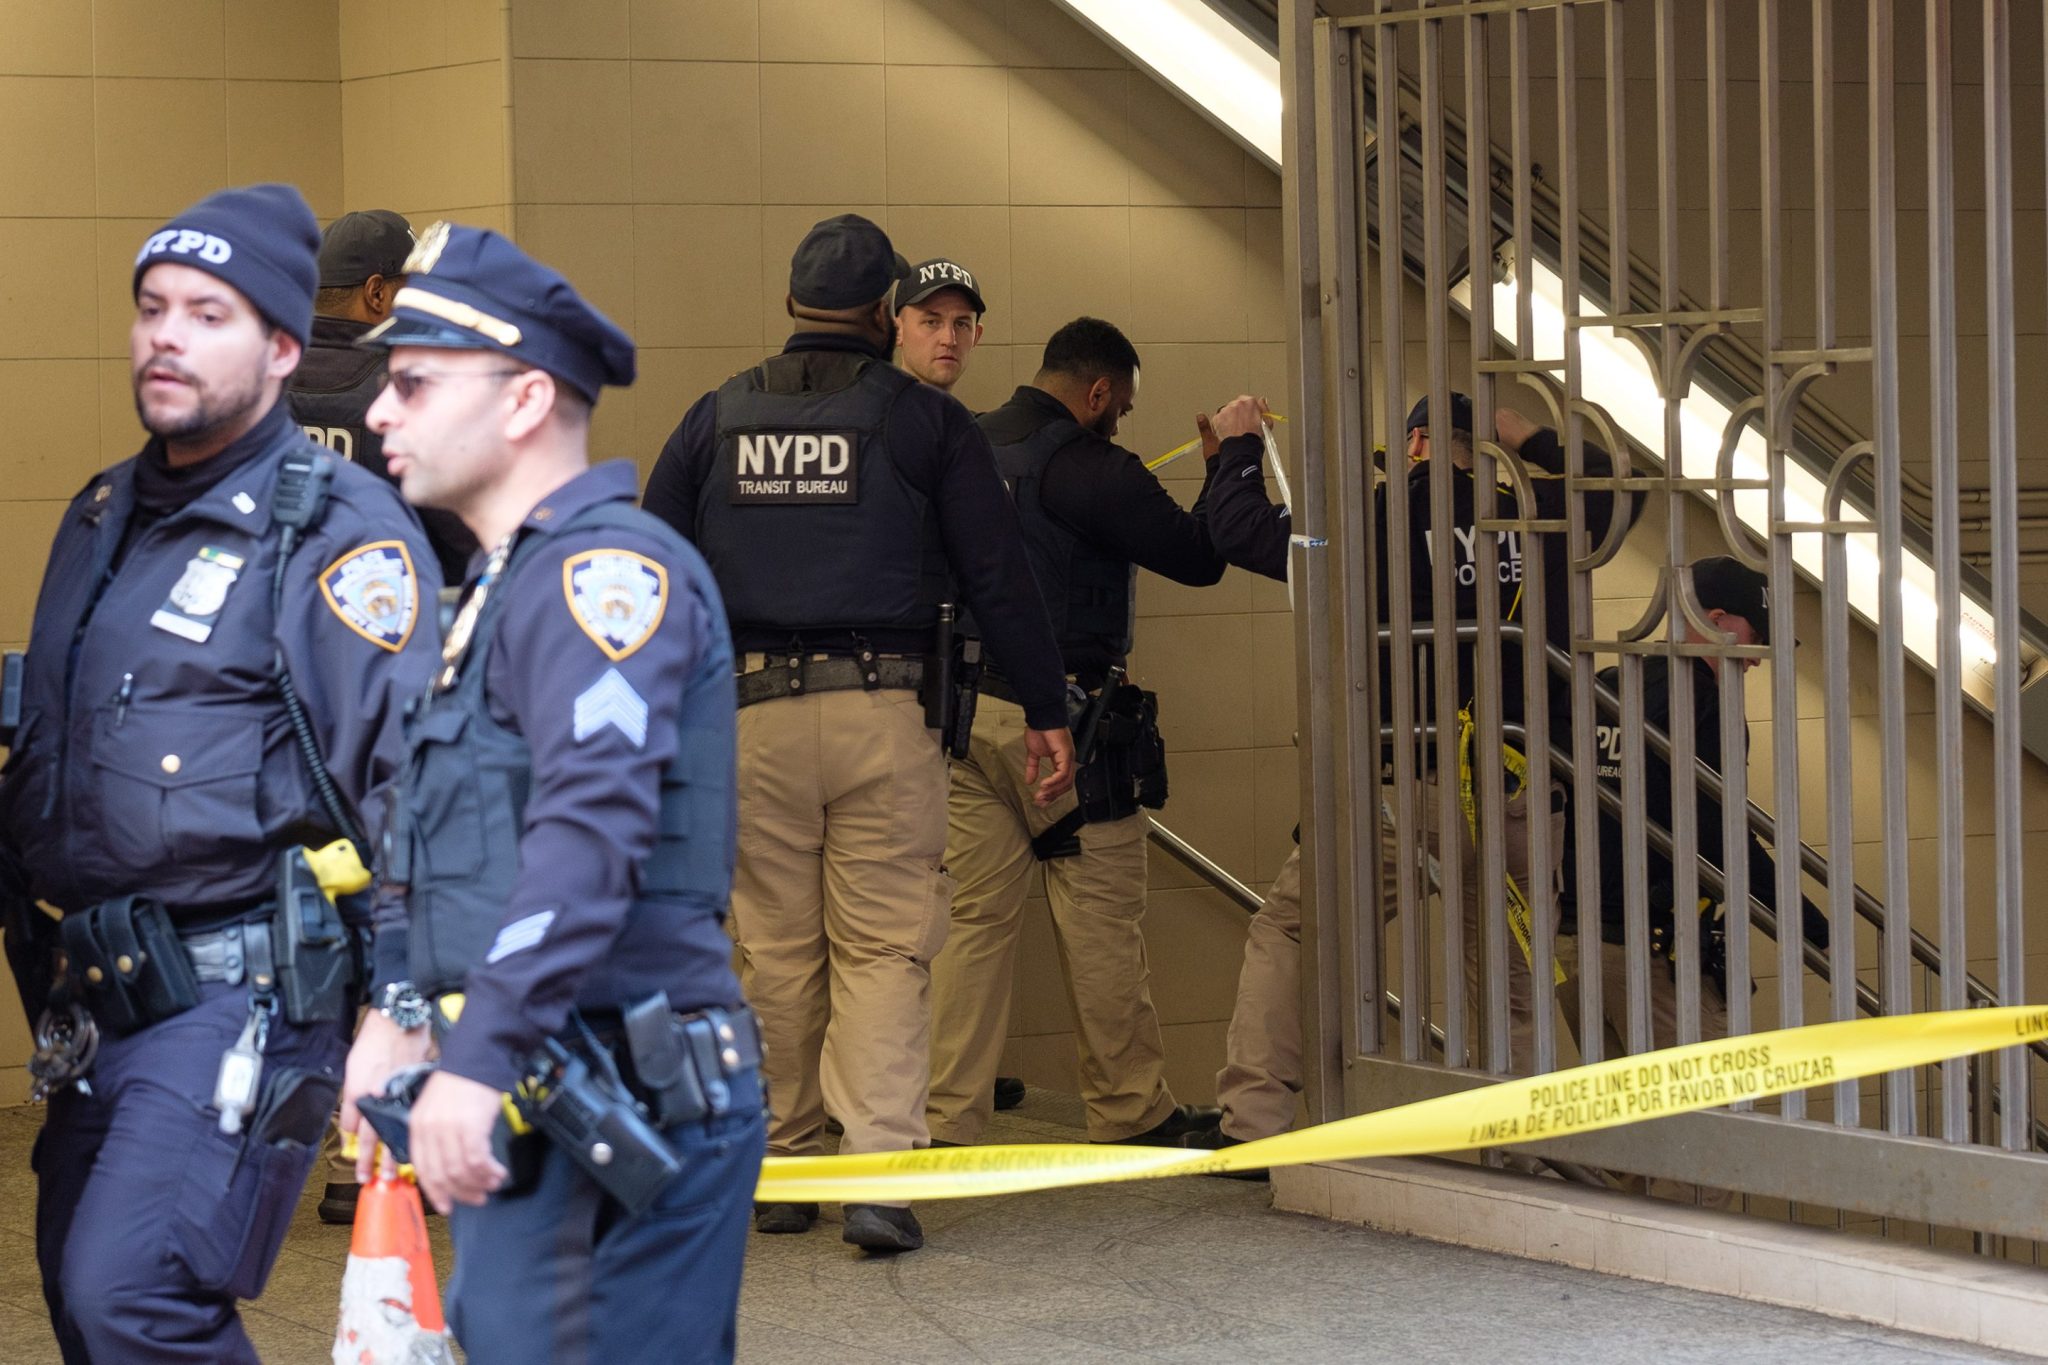 Man shot with own gun on during evening rush hour on crowded NYC subway train